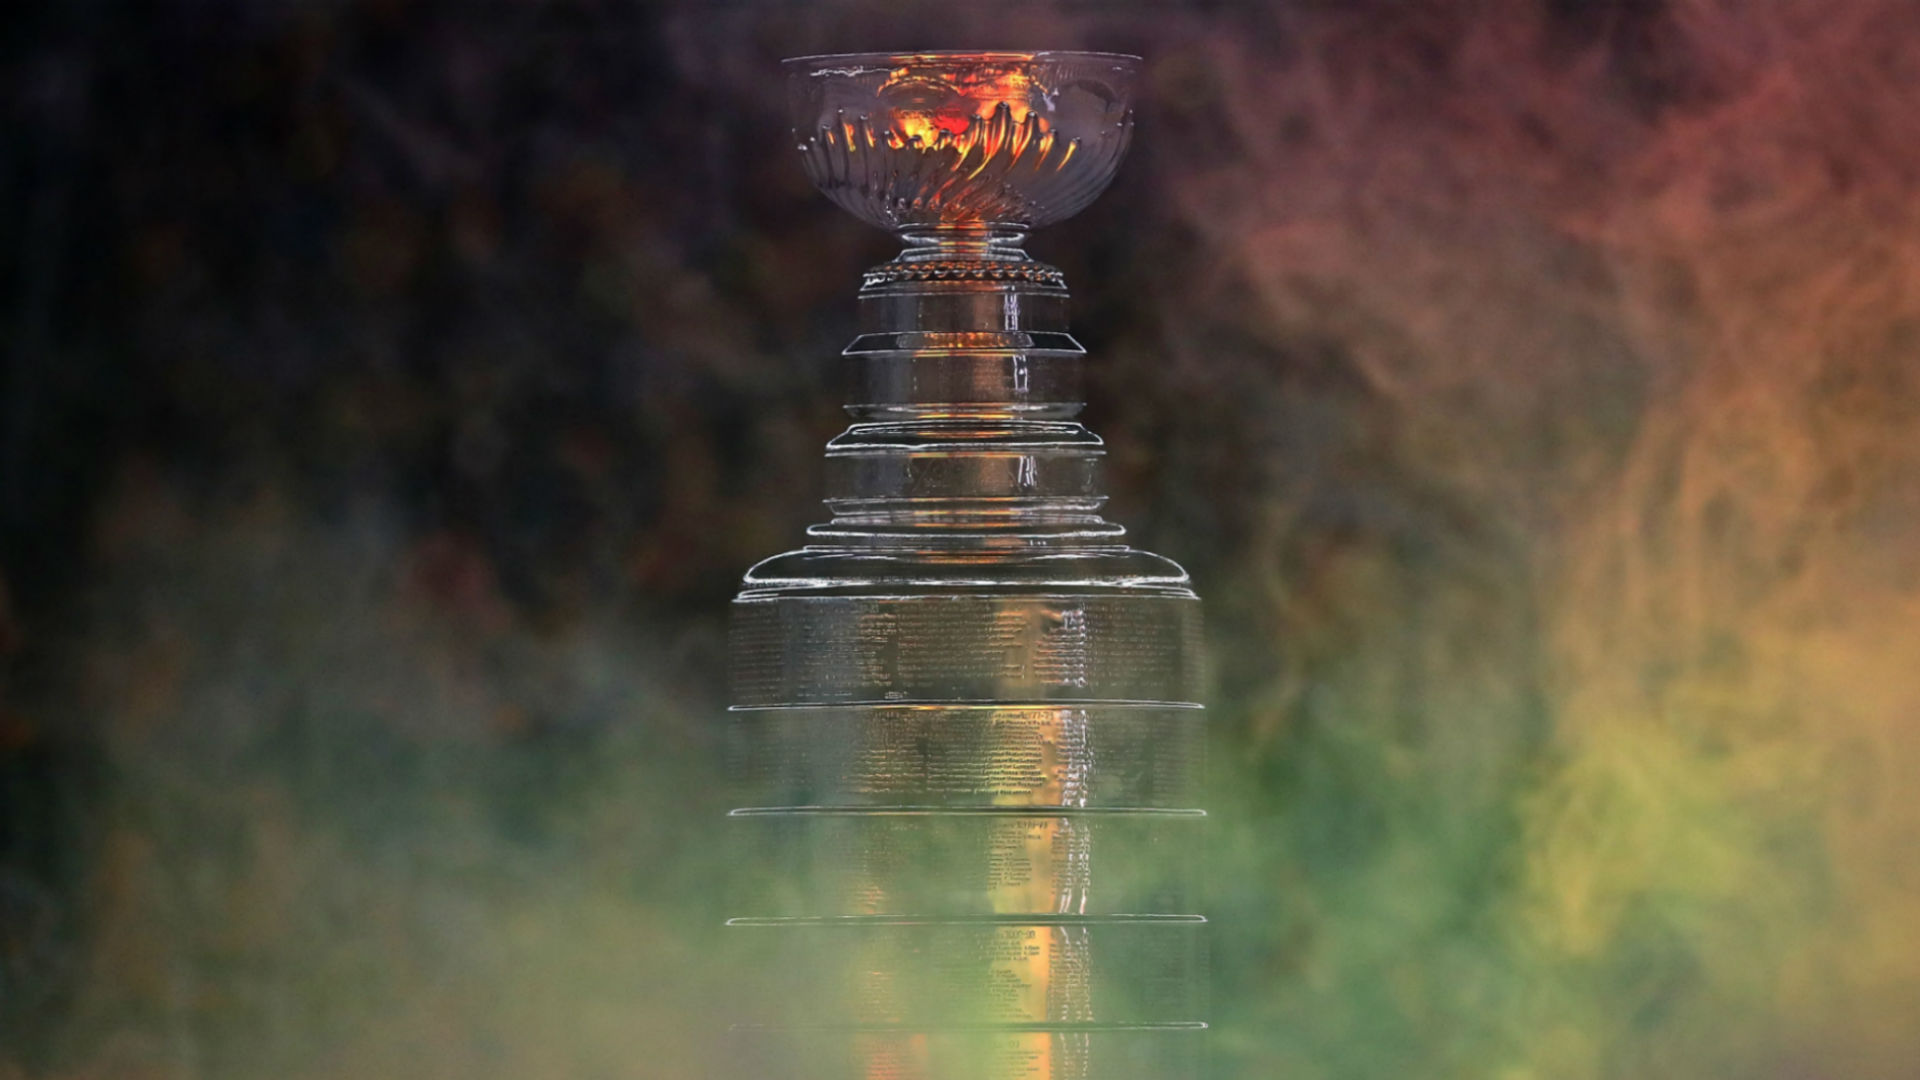 NHL playoffs schedule 2019: Full bracket, dates, times, TV channels for every series ...